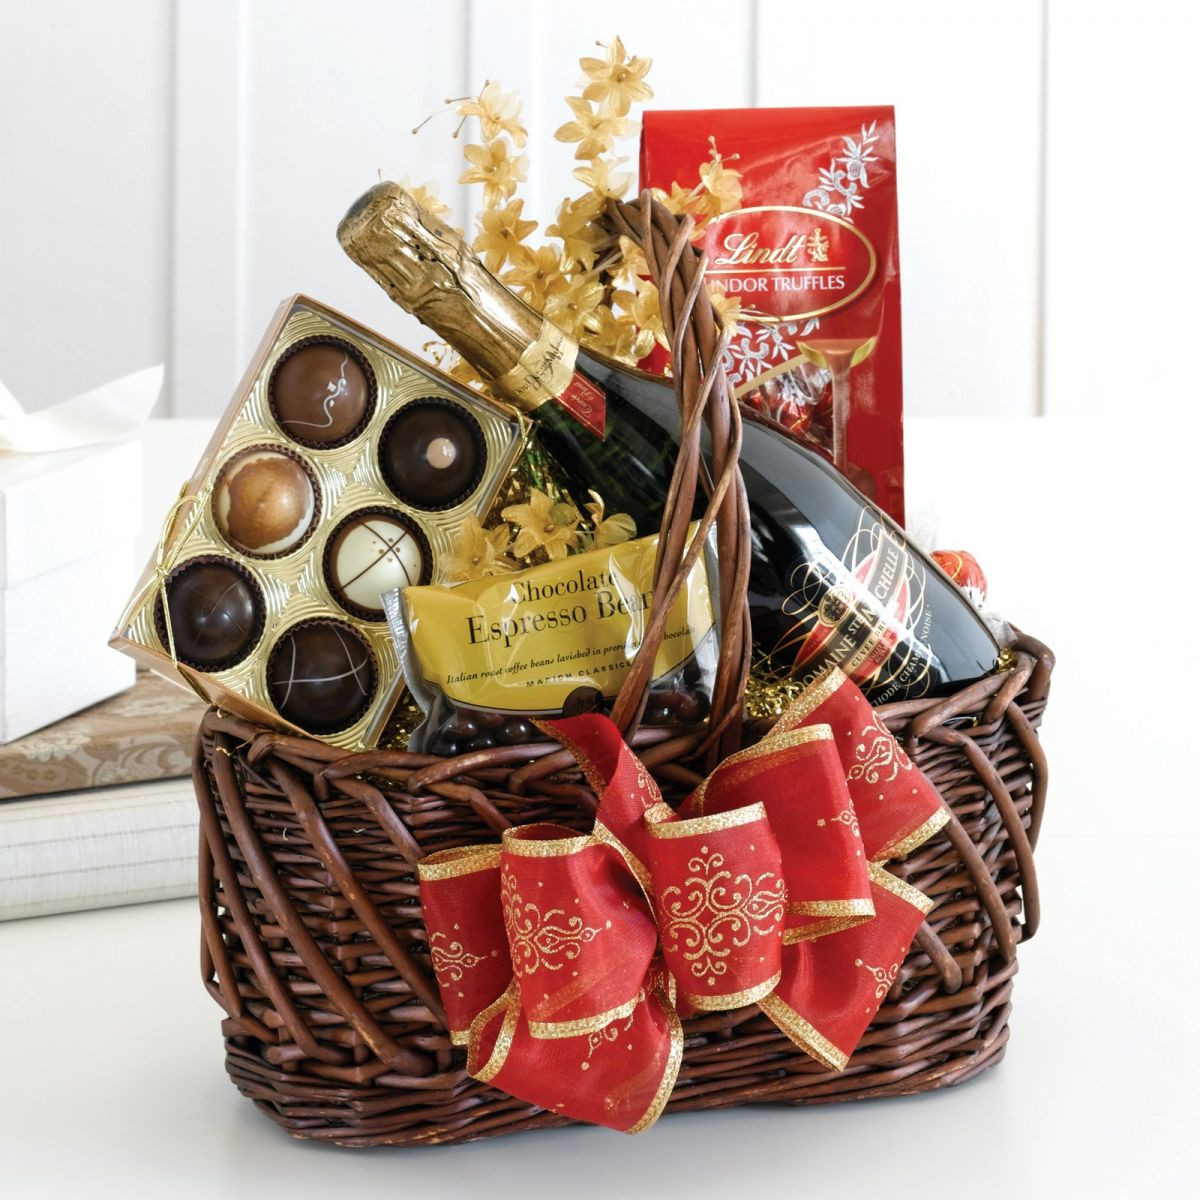 Candy Gift Basket Ideas
 Chocolate Gift Basket Ideas by colorfulcan s